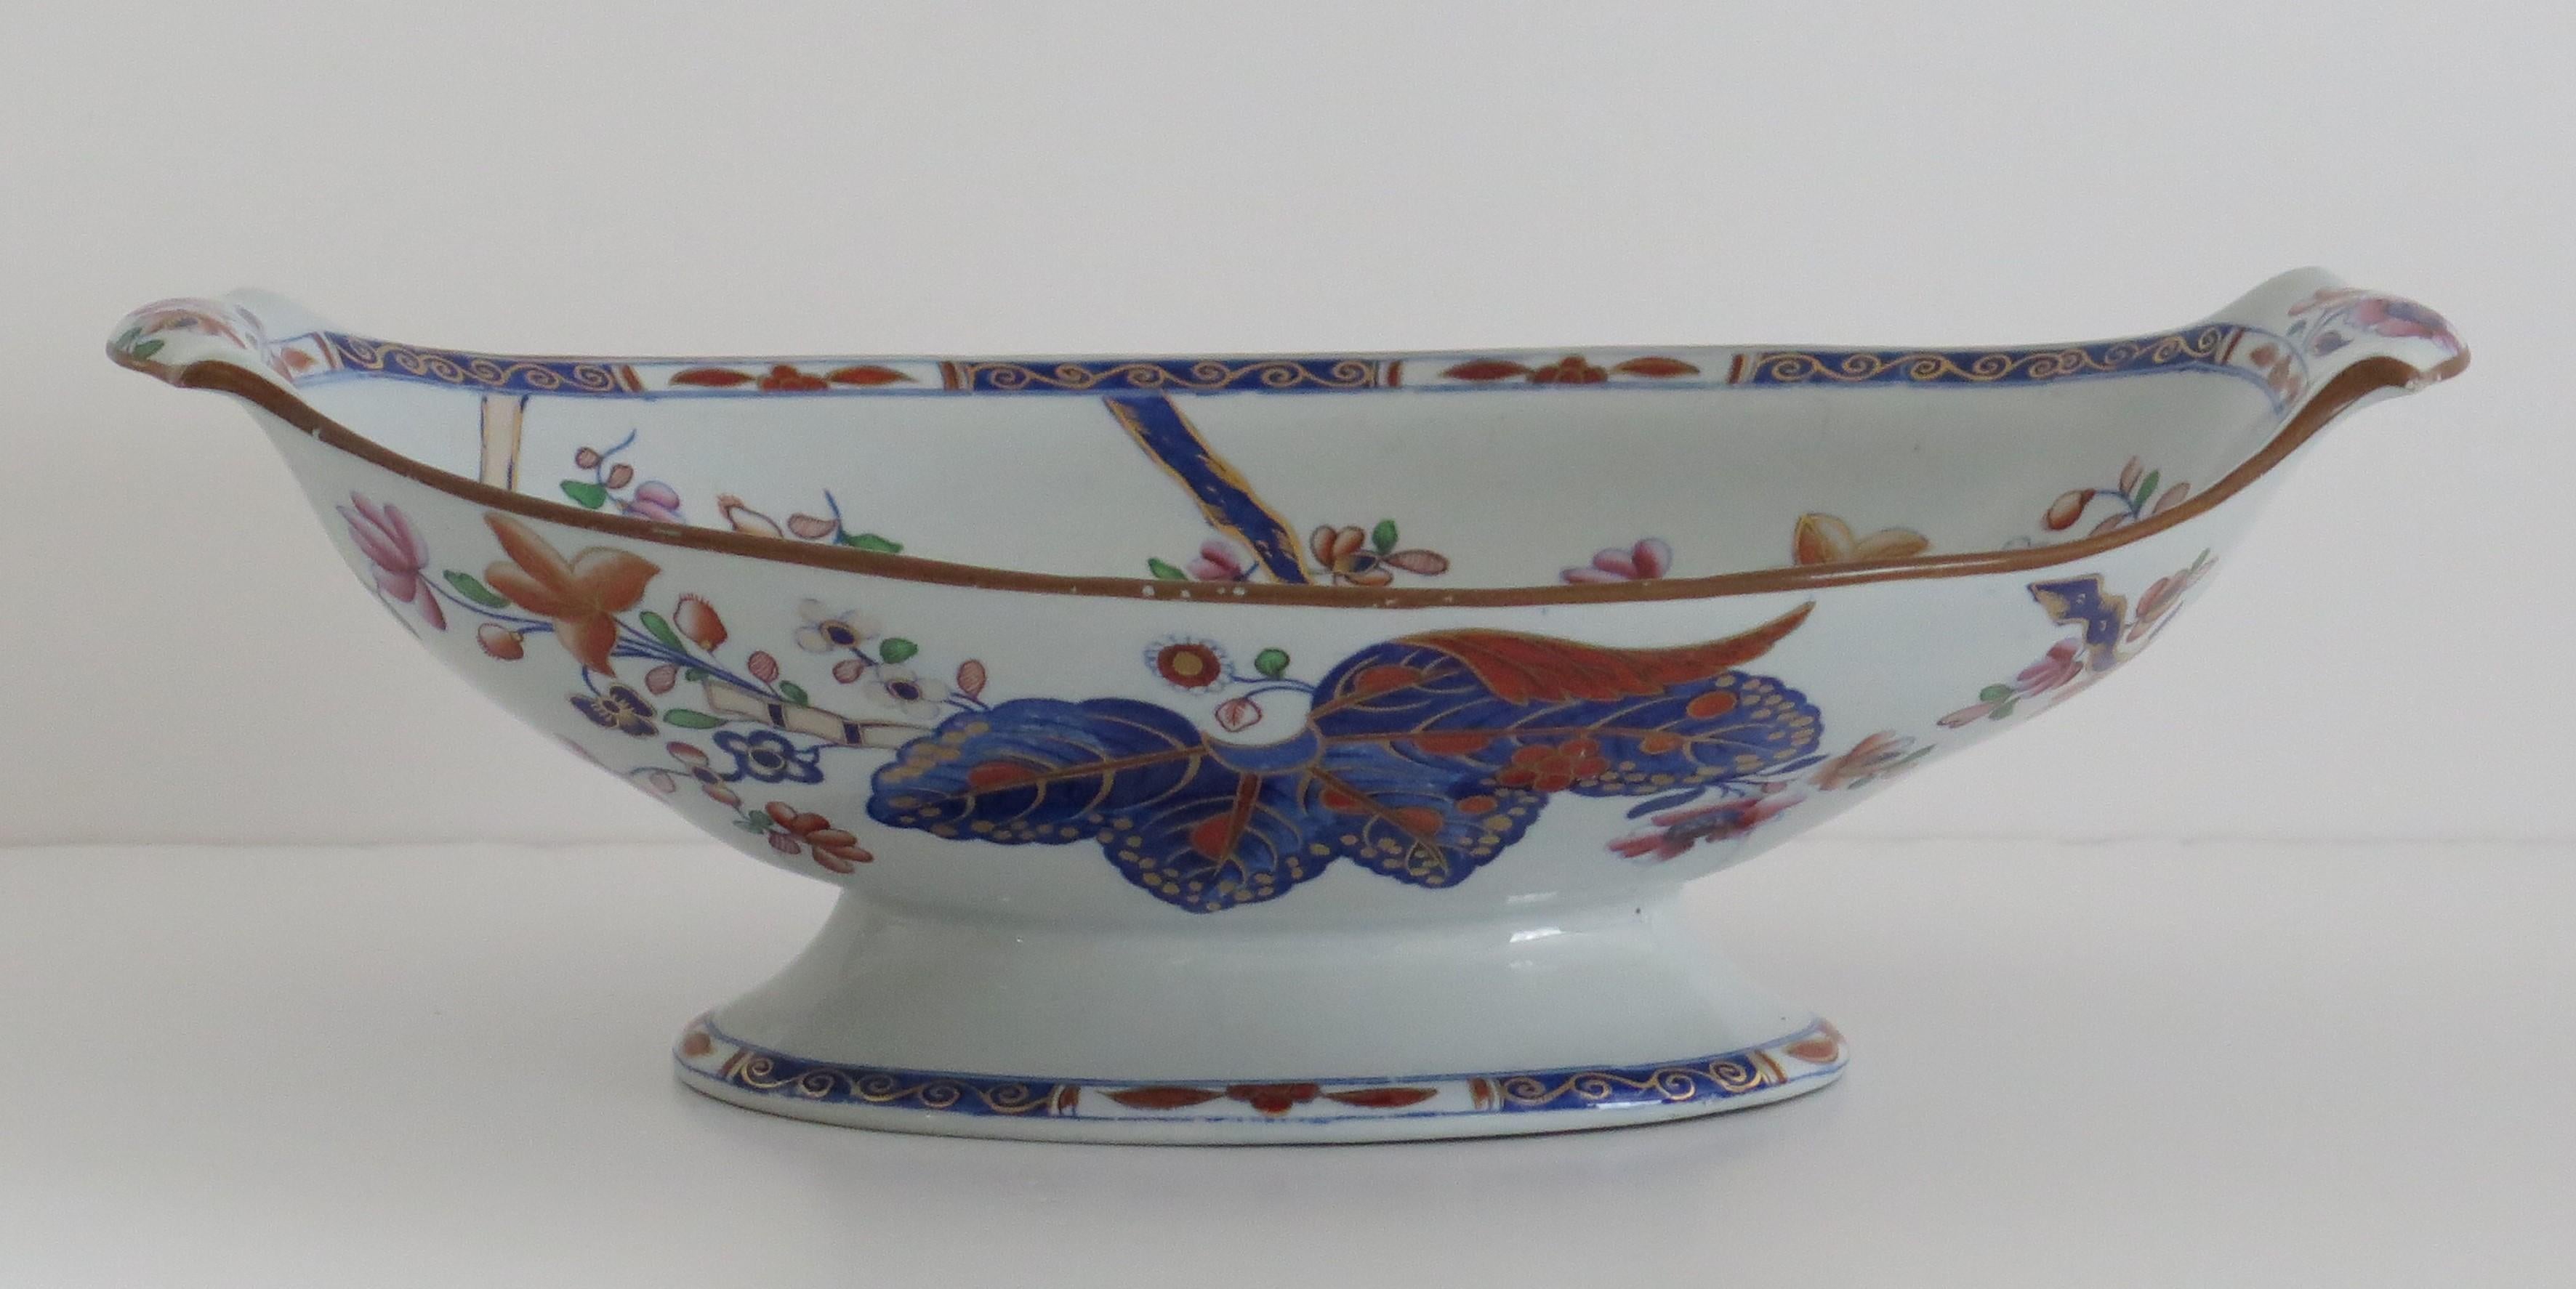 This is a very good Stone China (Ironstone) large Pedastal Bowl, hand painted in the tobacco leaf pattern, number 2061, made by the Spode factory in the early 19th century, English Georgian period, circa 1820.

The bowl is raised on an oval foot